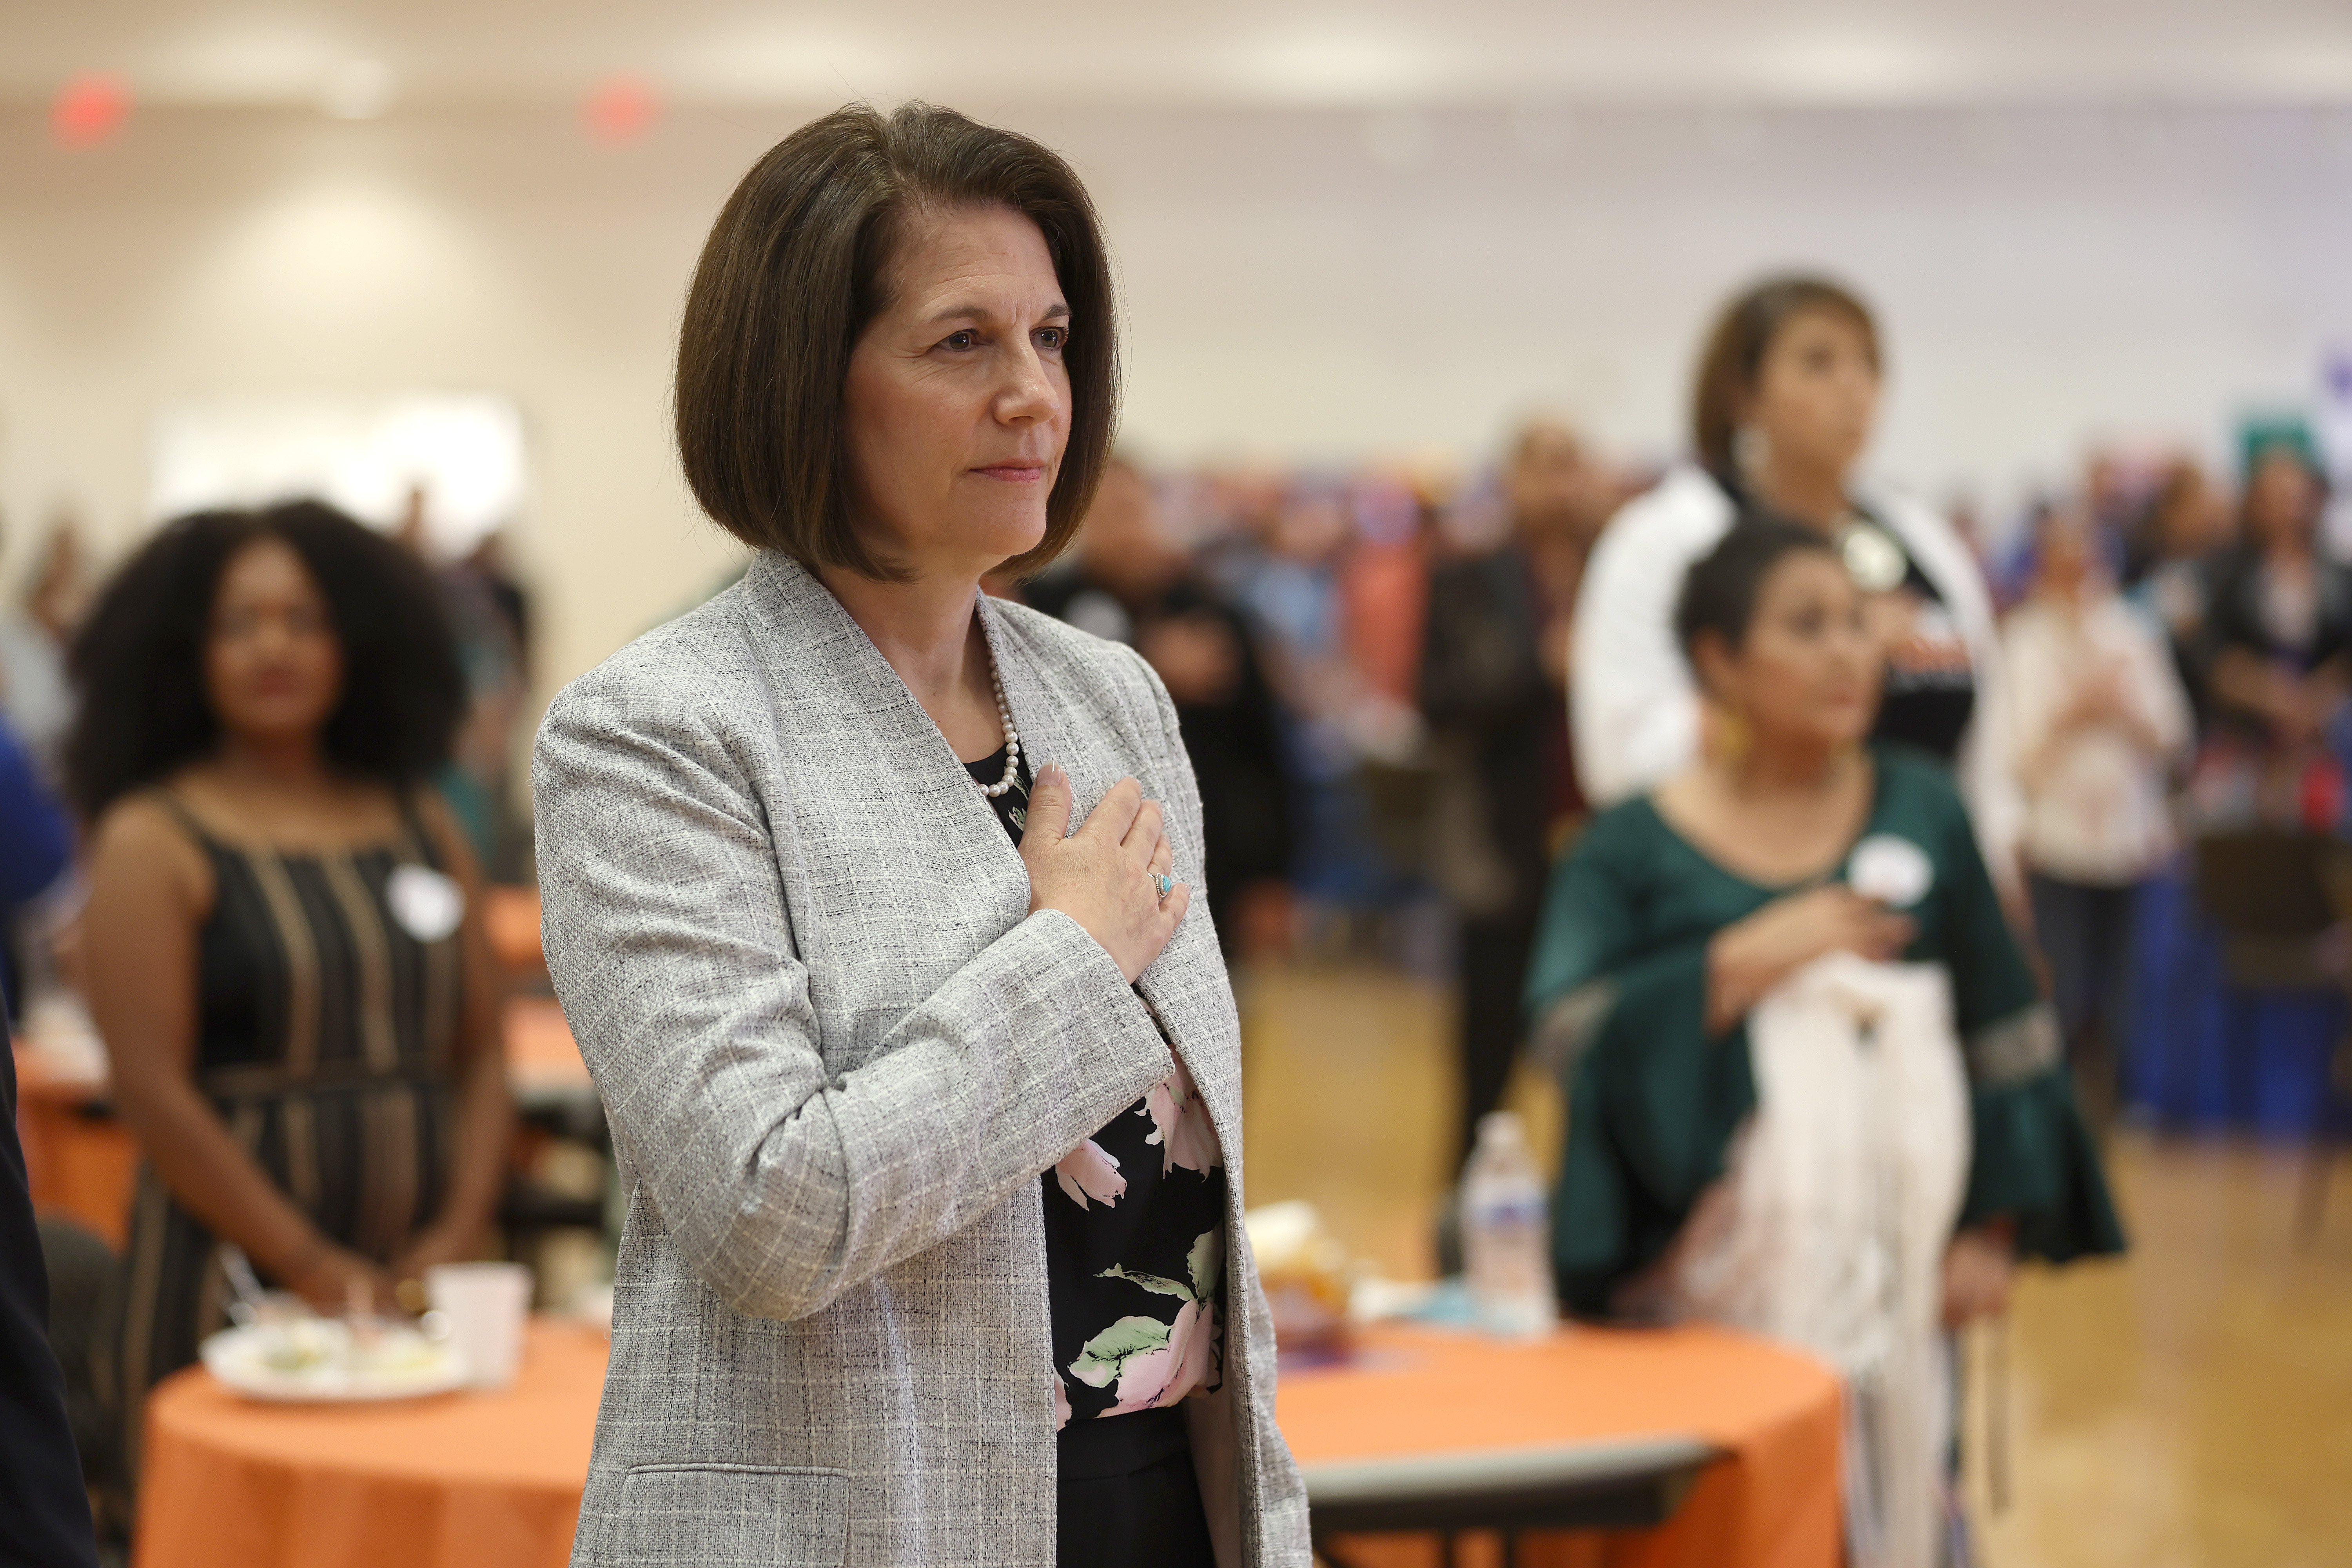 U.S. Sen. Catherine Cortez Masto (D-NV) holds her hand over her heart as the National Anthem is sung during the La Gran Celebración Latina at East Las Vegas Community Center on October 16, 2022 in Las Vegas, Nevada.